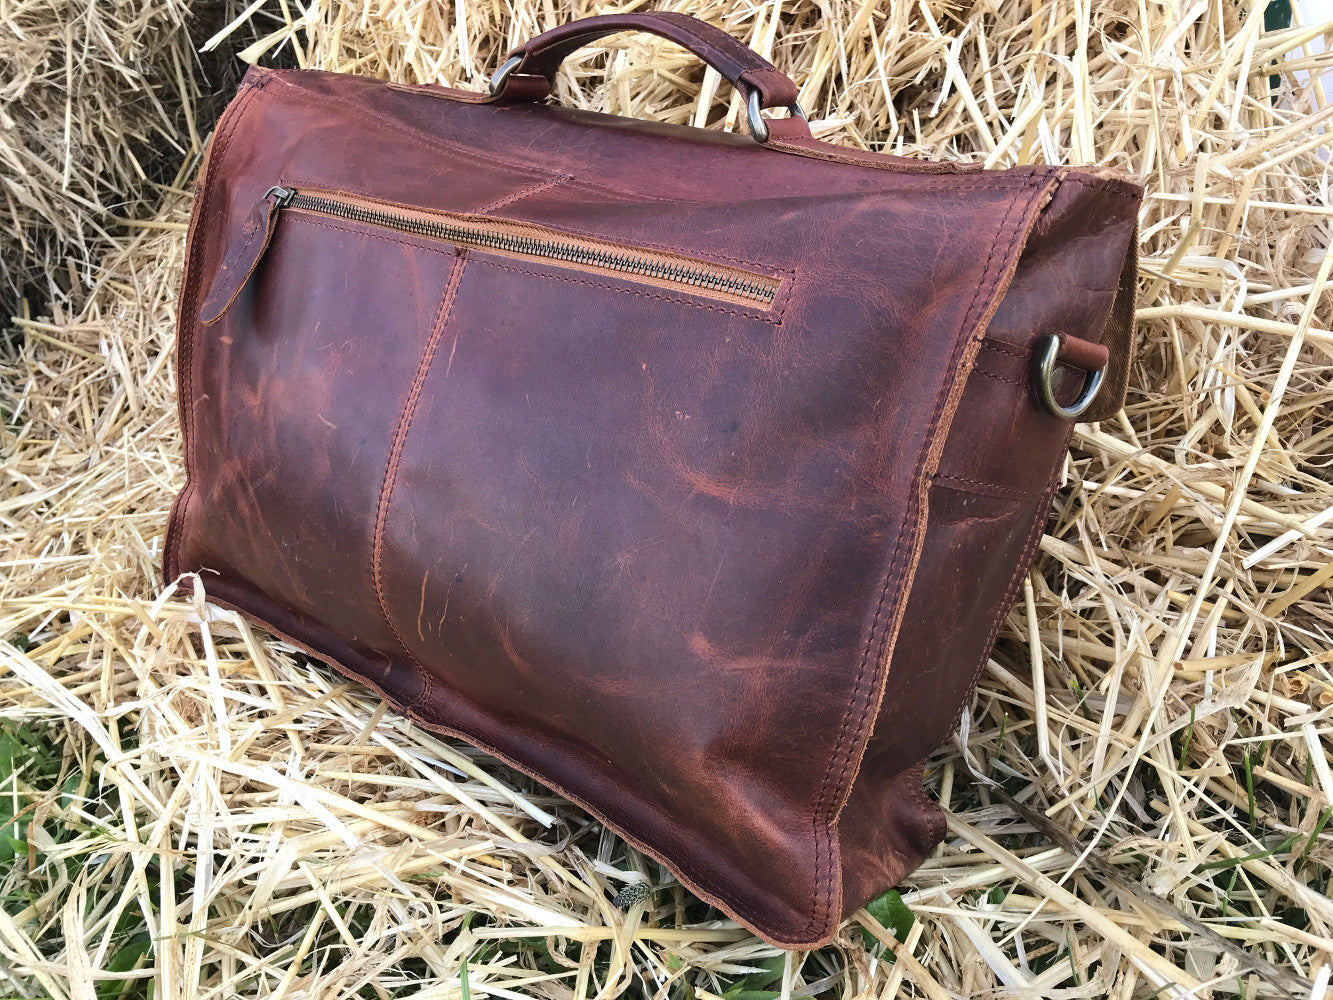 The Dorrington Briefcase. A classic 30's styled leather briefcase by Burghley Bags. A handmade leather vintage work bag, with enough space for 15" laptops. Comes with an adjustable and detachable shoulder strap. Vintage brown back showing zip pocket.